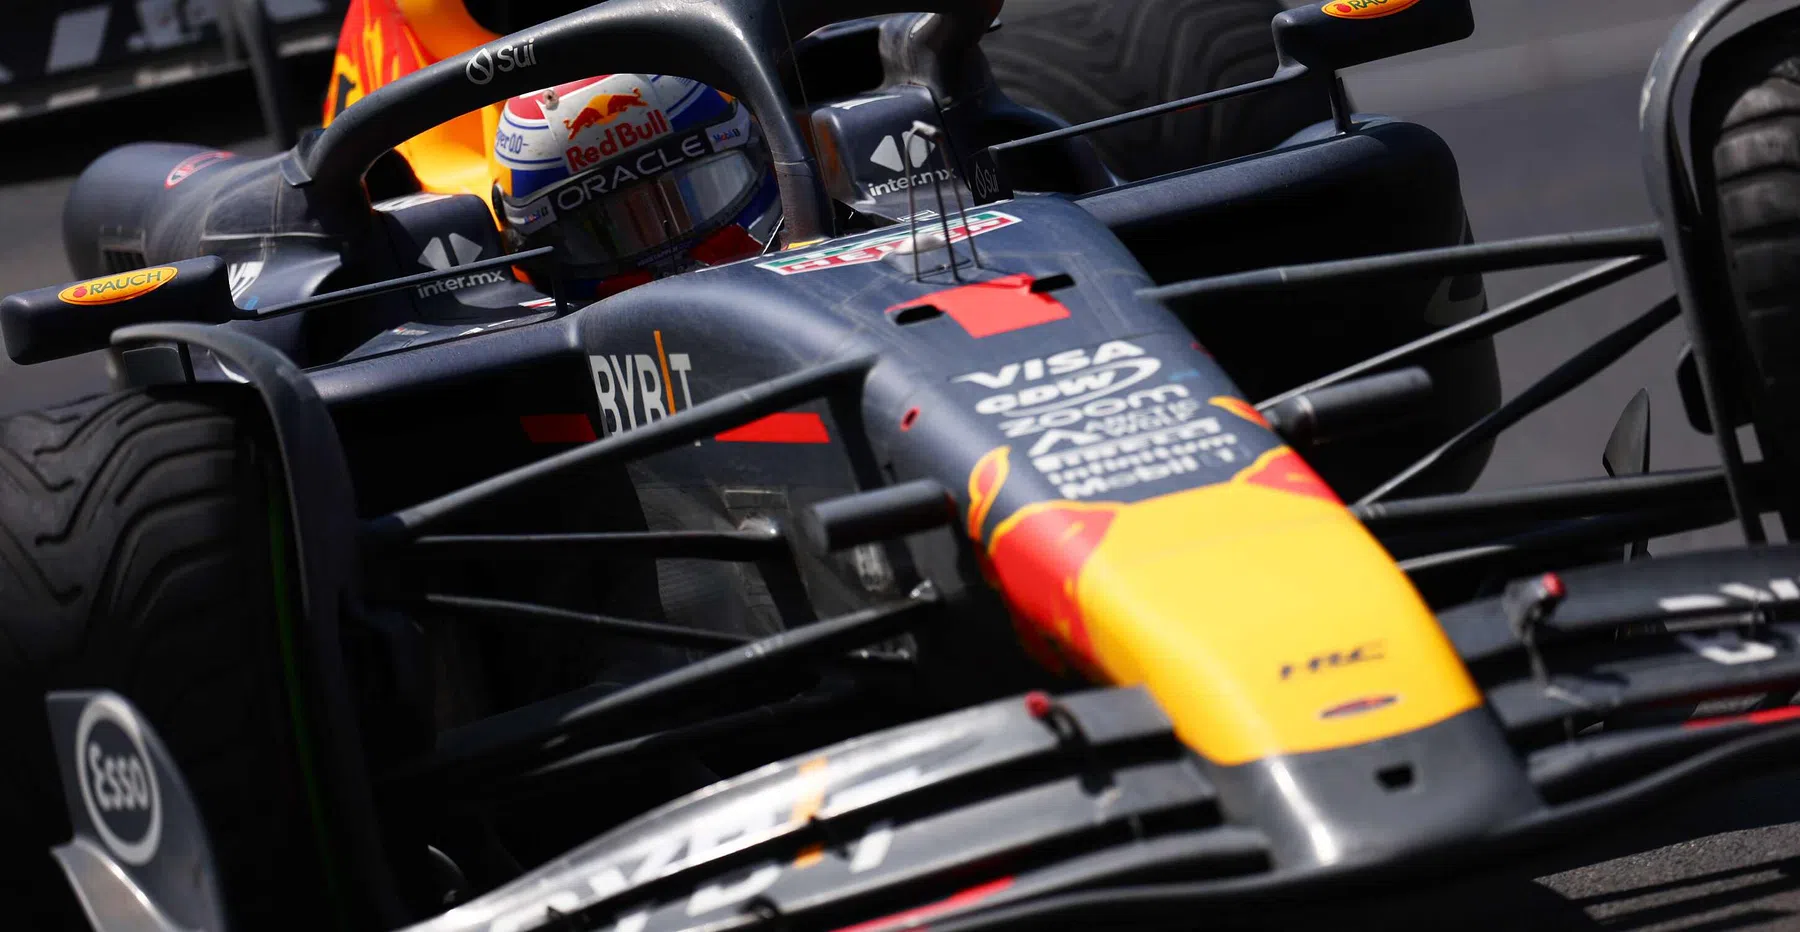 Red Bull threatens to use illegal solution if FIA does not intervene